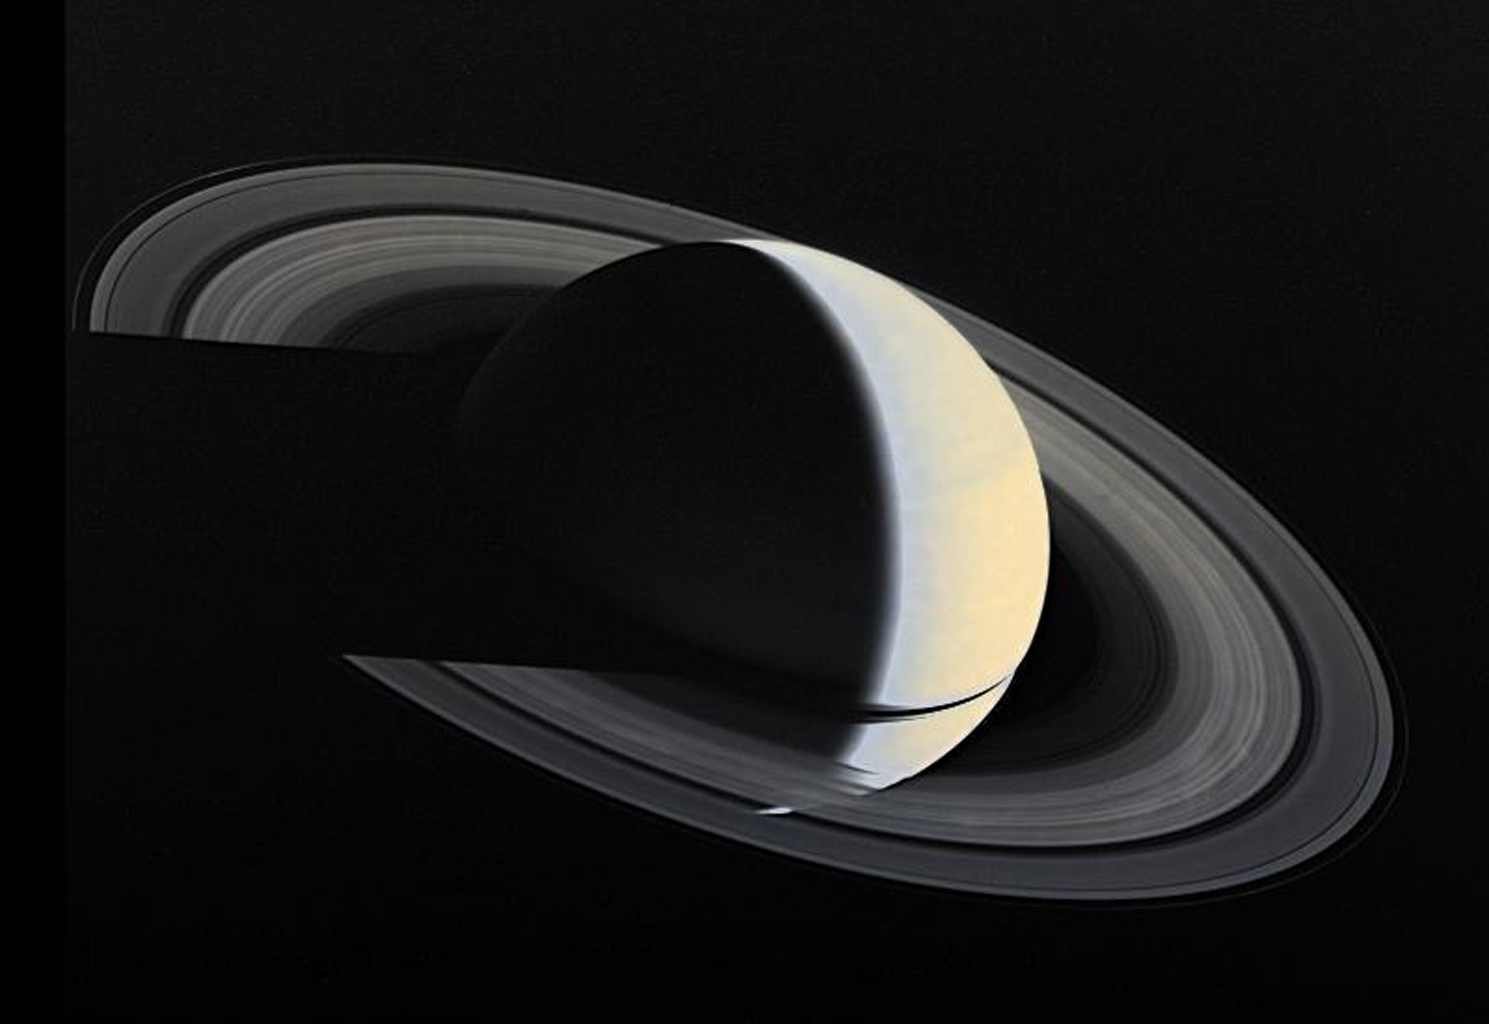 Saturn's Rings to 'Disappear' in 2025: A Celestial Illusion - BNN Breaking